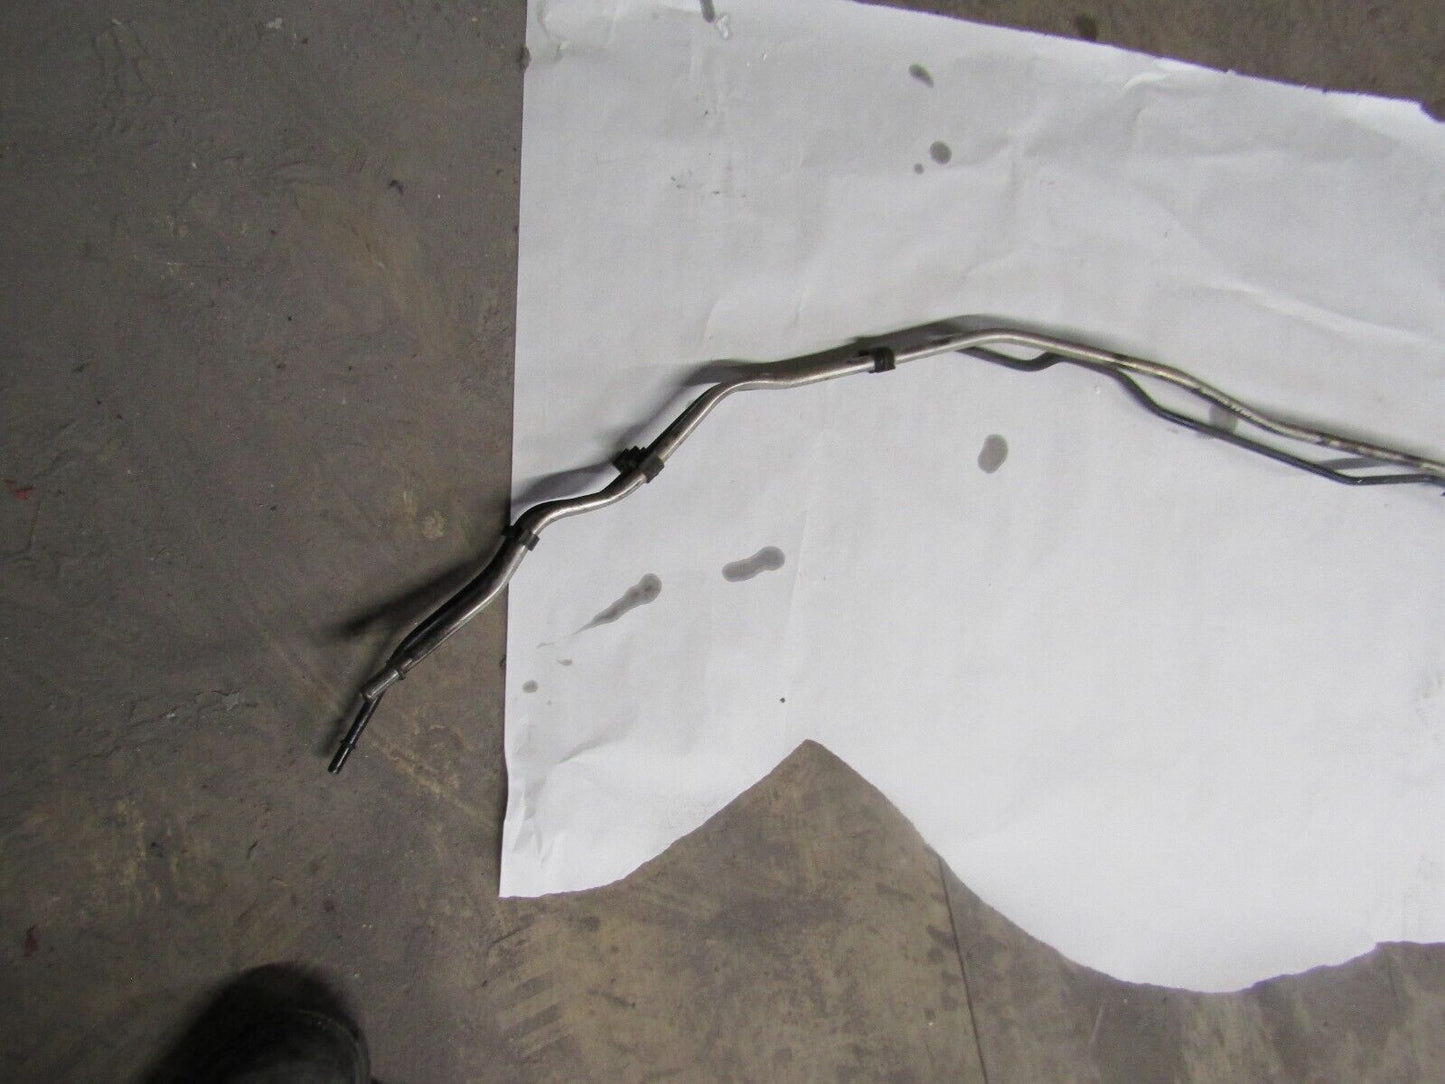 JAGUAR X-TYPE 2001 - 2010 FUEL FEED AND VAPOUR PIPES-DIESEL